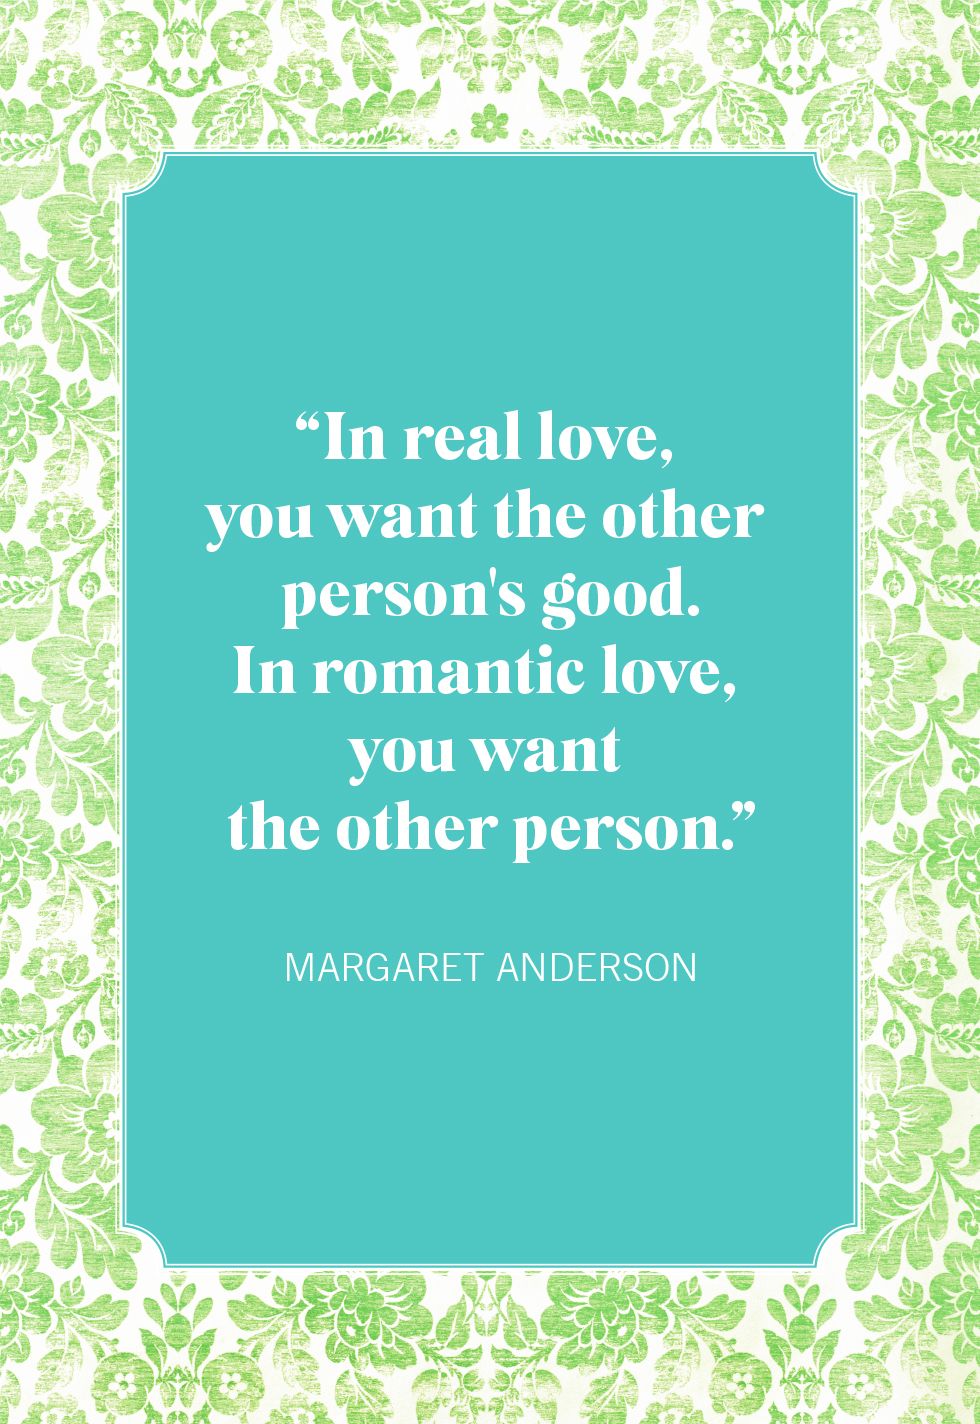 Love quotes – What is the real love?